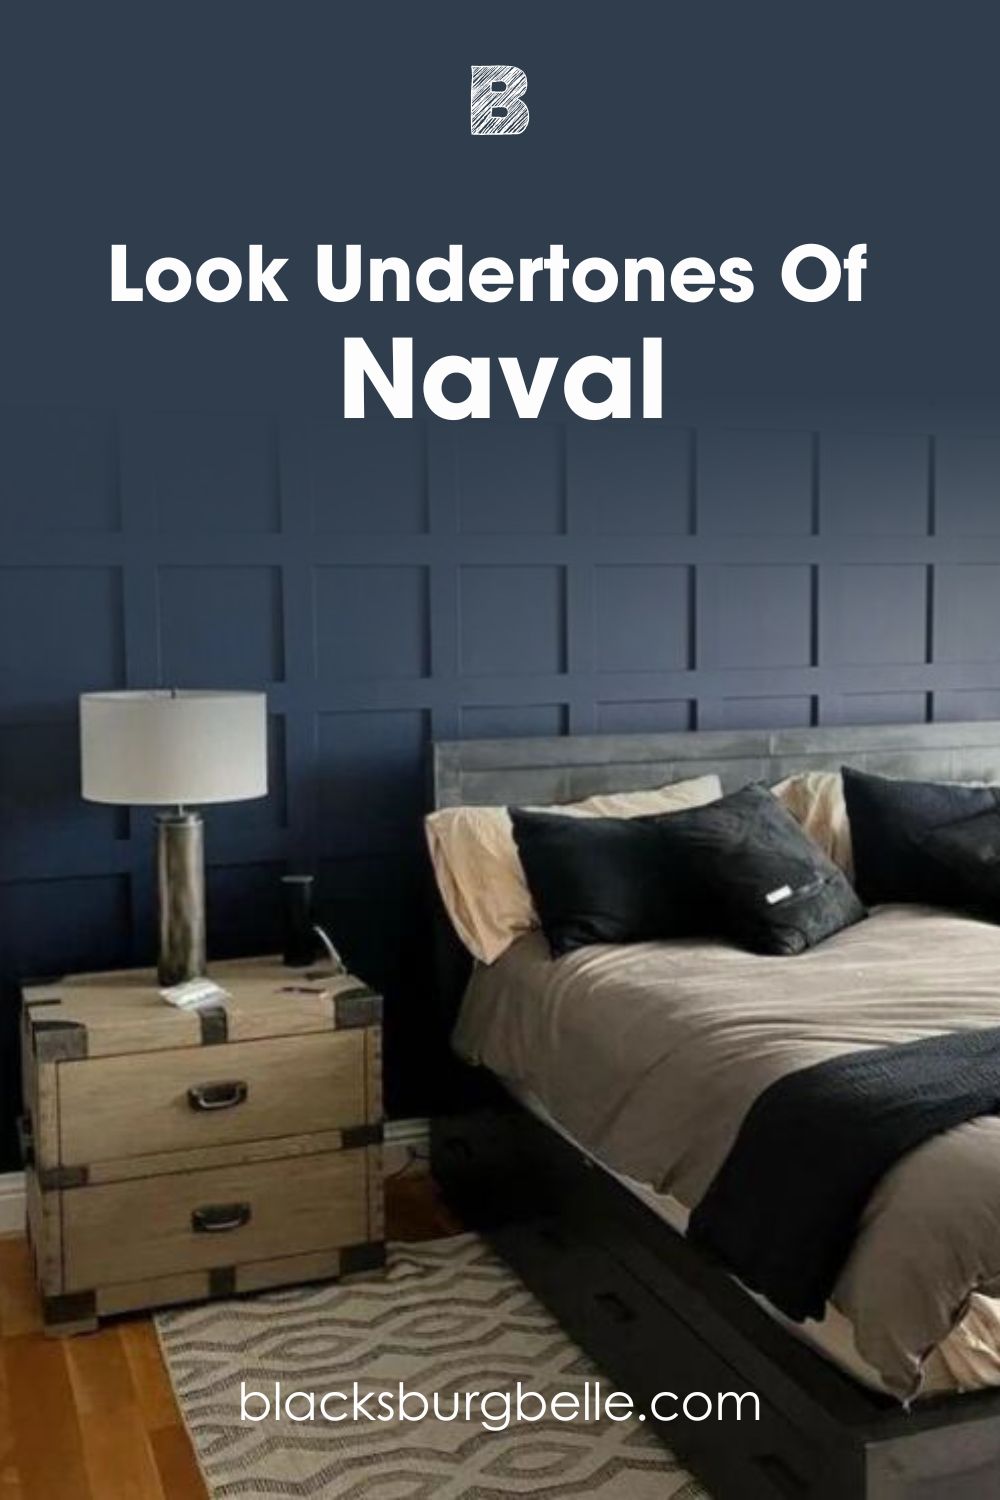 A Closer Look at the Undertones in Naval